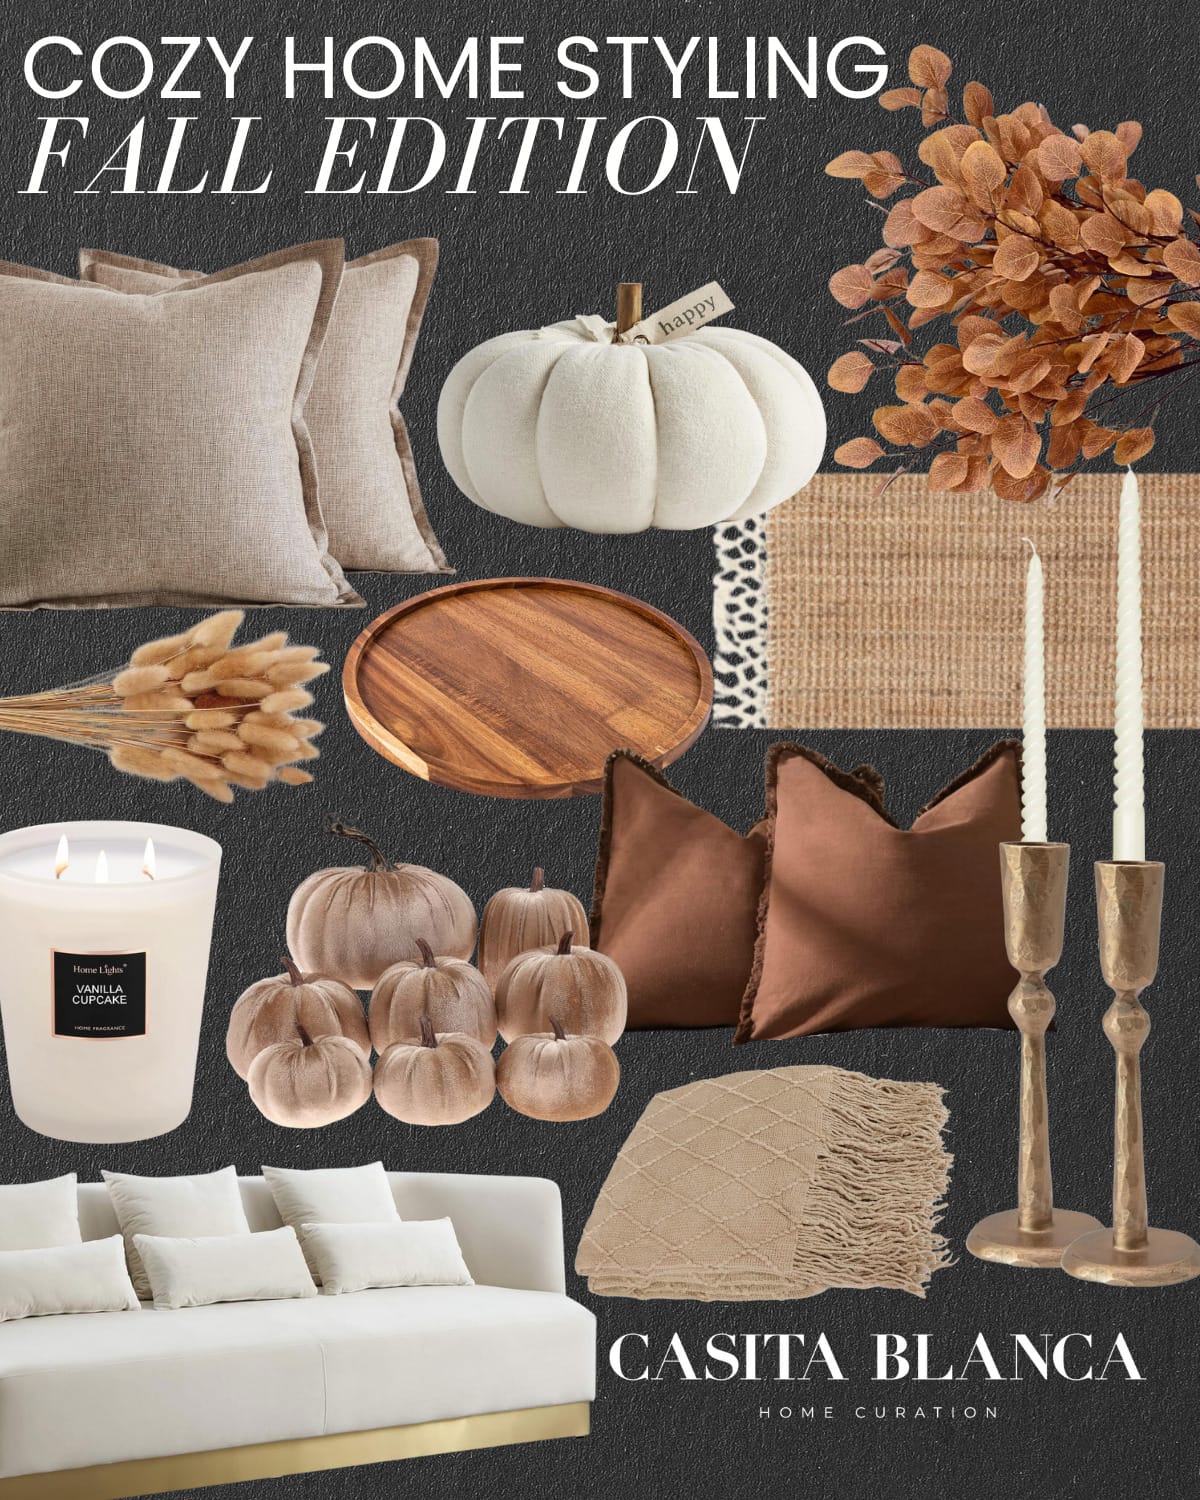 cozy home styling fall edition | #cozy #home #styling #fall #edition #pillow #autumn #pumpkin #couch #comfy #candle #lighting #wooden #rug